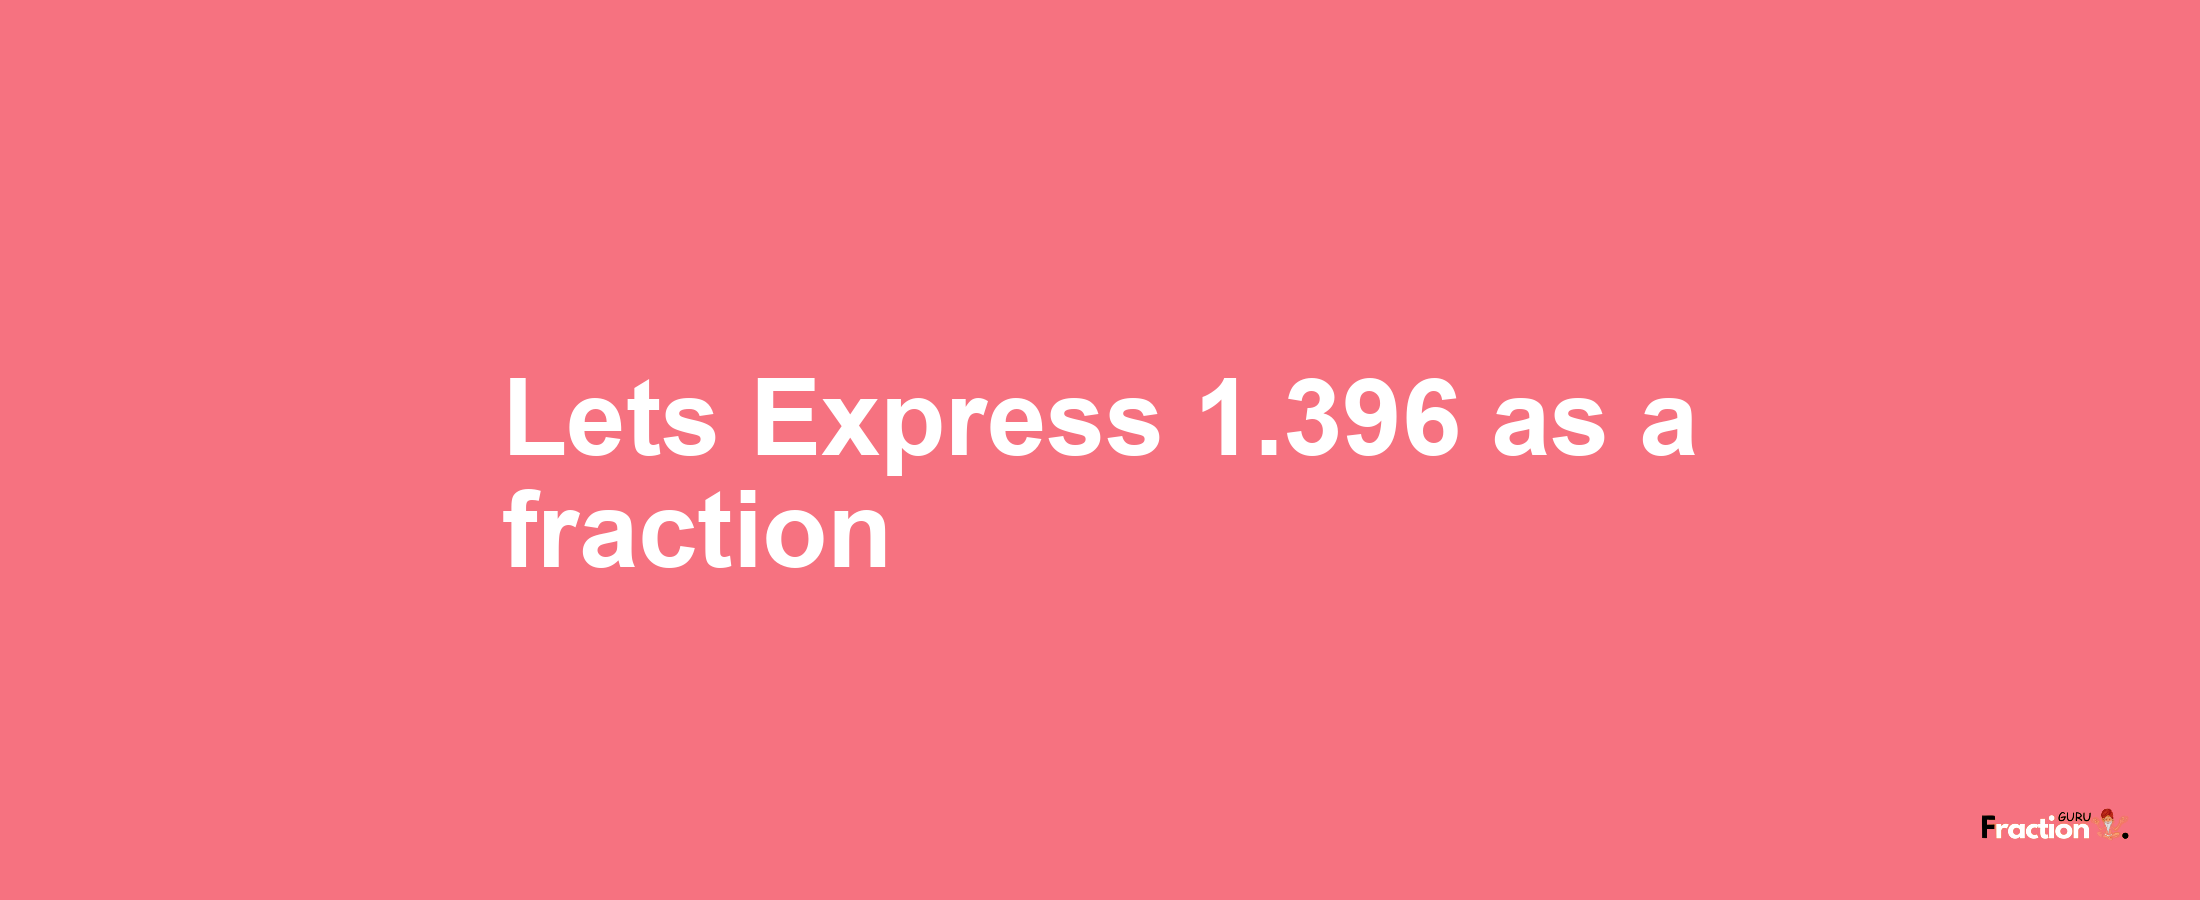 Lets Express 1.396 as afraction